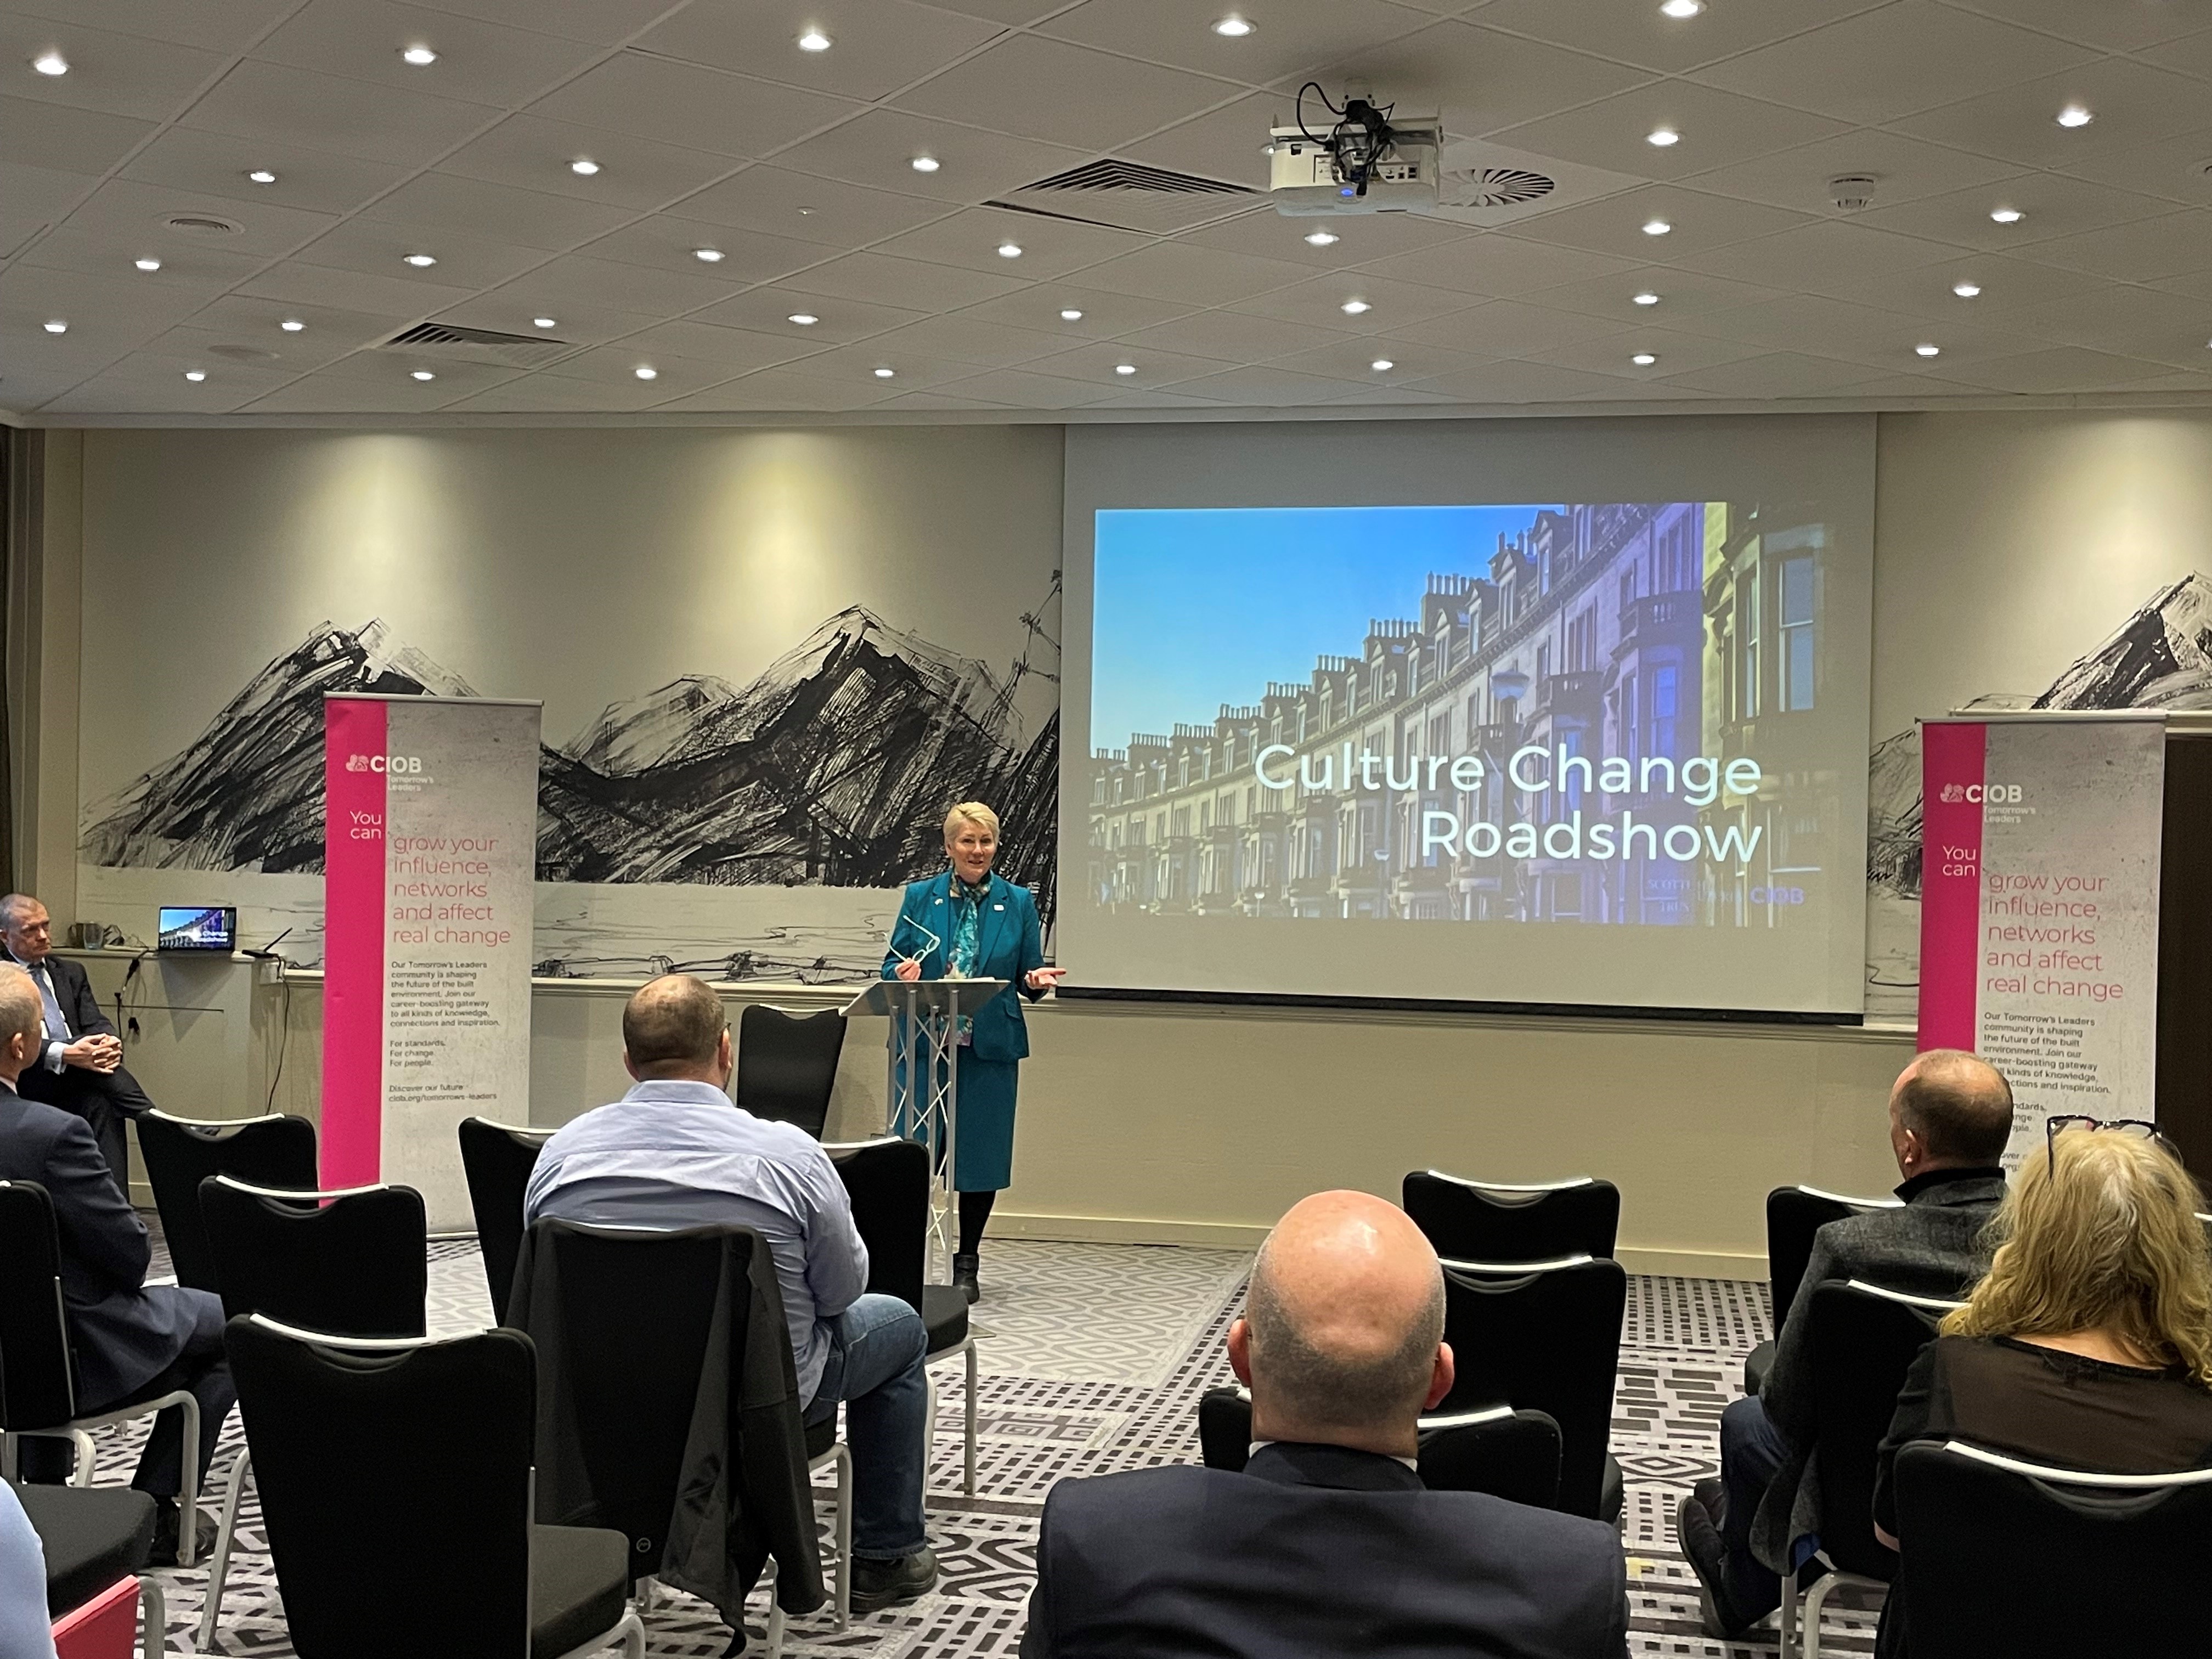 CIOB sets out plan to inspire change and share best practice at Culture Change Roadshow